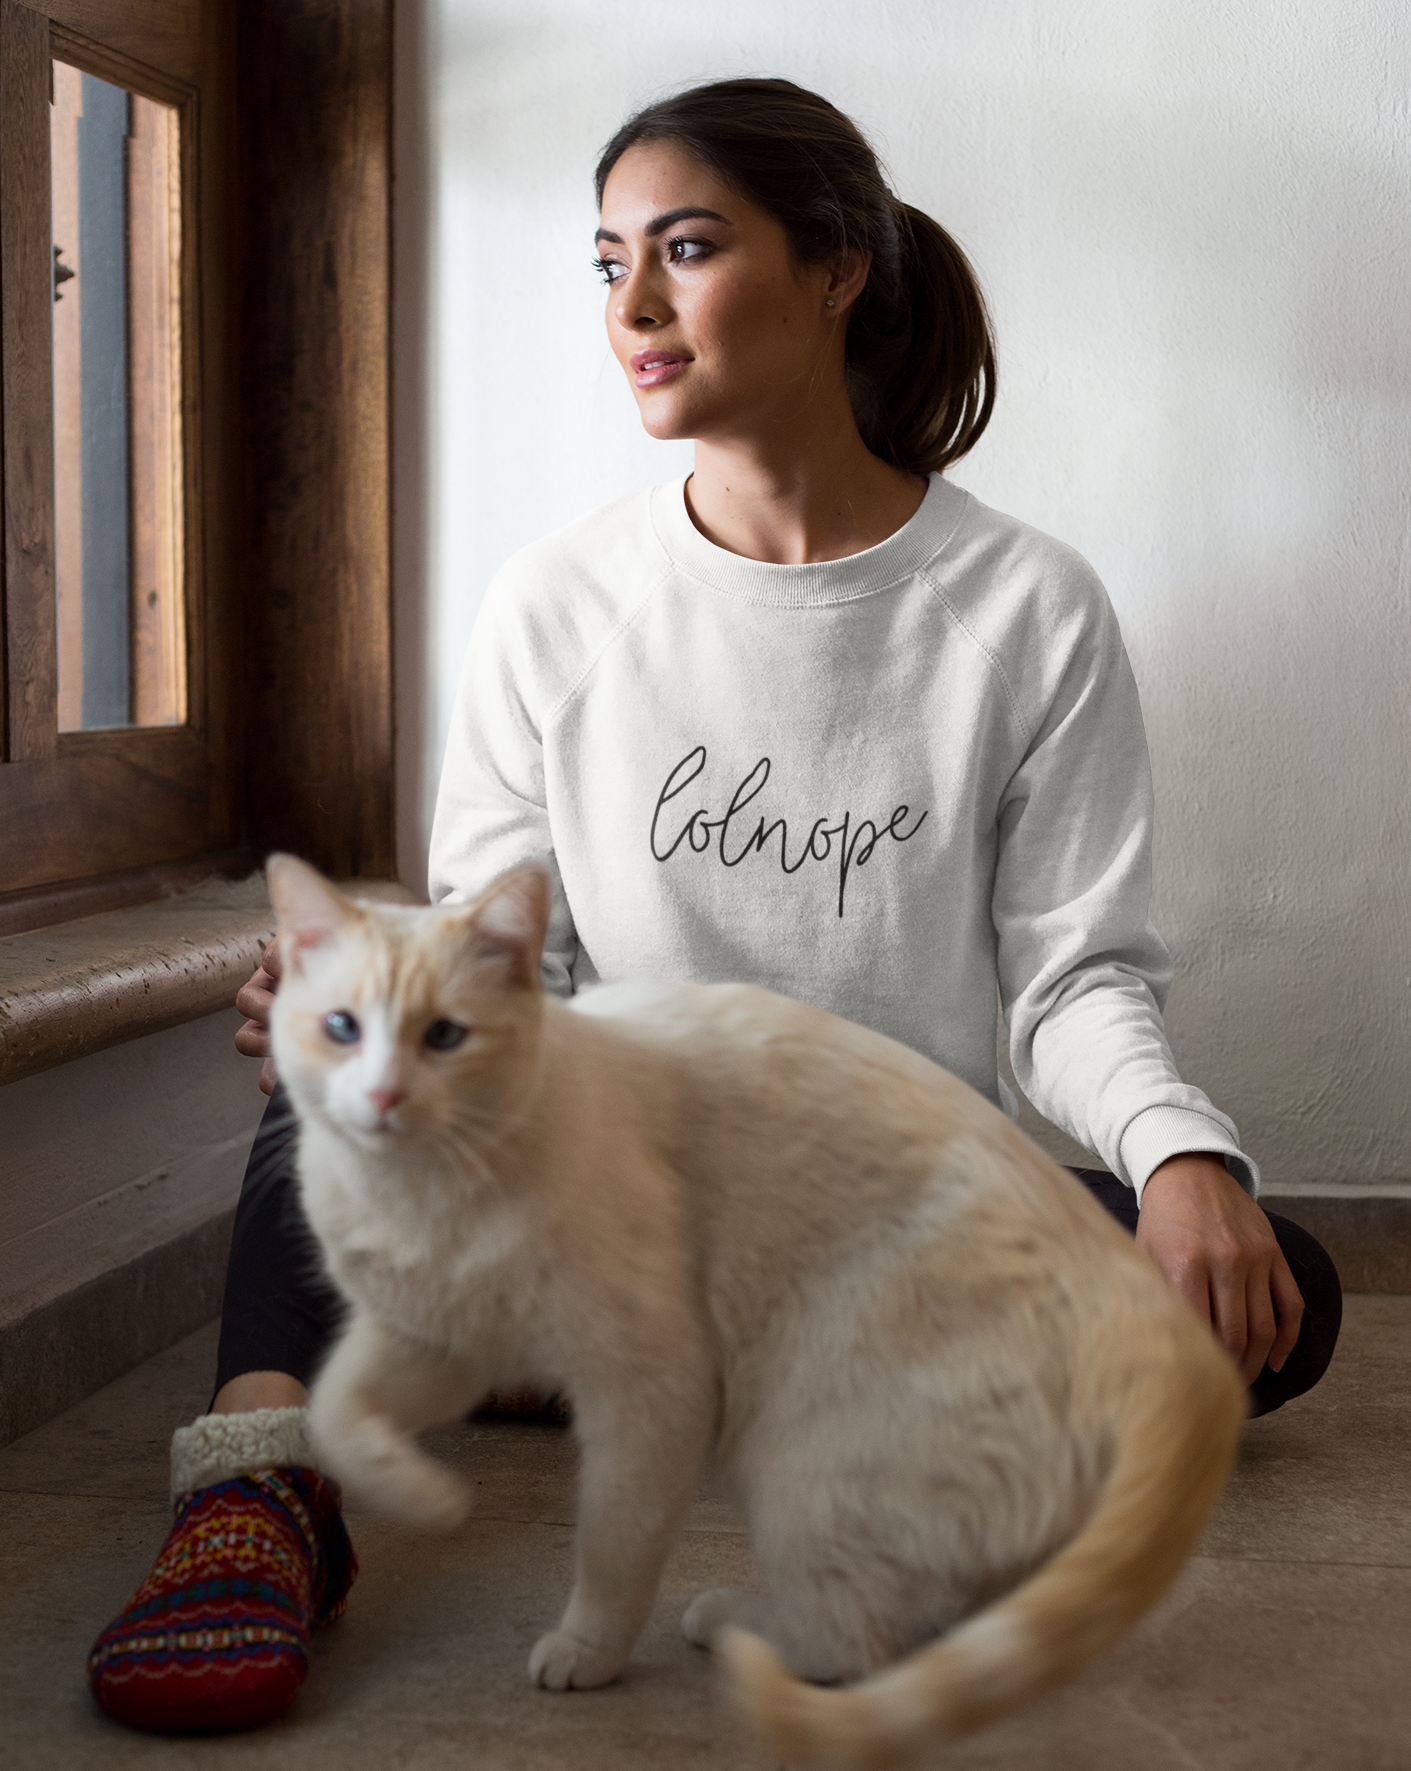 Ever have those days where you just say lolnope? This funny crewneck sweatshirt can say it so you don't have to! This sweatshirt makes a great gift for those who just can't in your life!